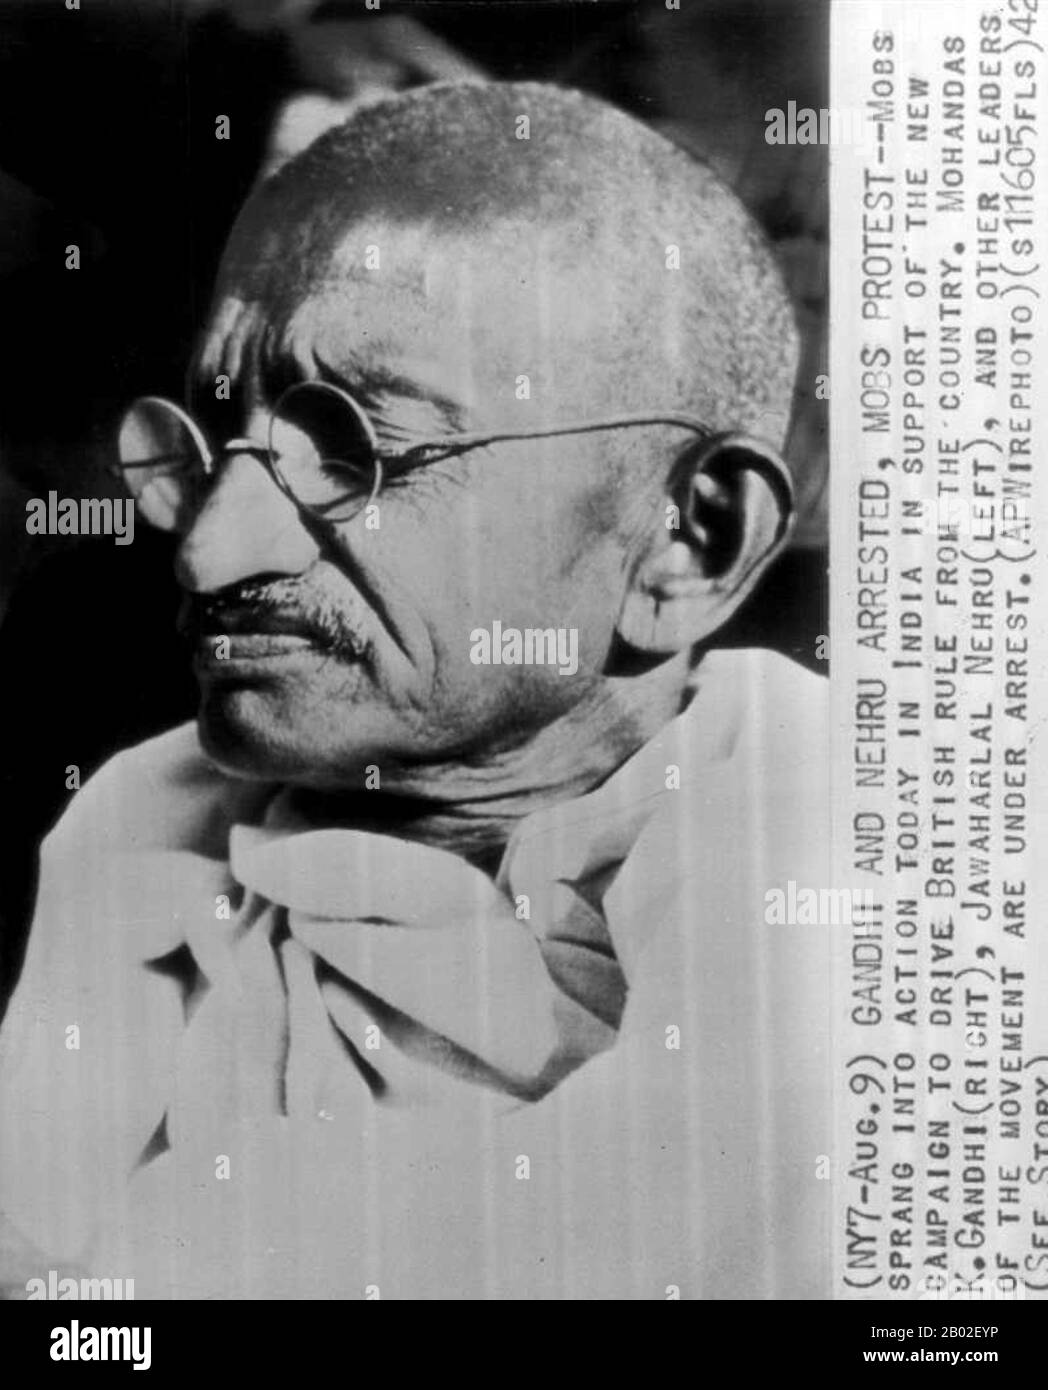 Mohandas Karamchand Gandhi (2 October 1869 – 30 January 1948) was the pre-eminent political and ideological leader of India during the Indian independence movement. He pioneered satyagraha. This is defined as resistance to tyranny through mass civil disobedience, a philosophy firmly founded upon ahimsa, or total non-violence. This concept helped India gain independence and inspired movements for civil rights and freedom across the world.  Gandhi is often referred to as Mahatma Gandhi or 'Great Soul', an honorific first applied to him by Rabindranath Tagore. In India he is also called Bapu (Guj Stock Photo